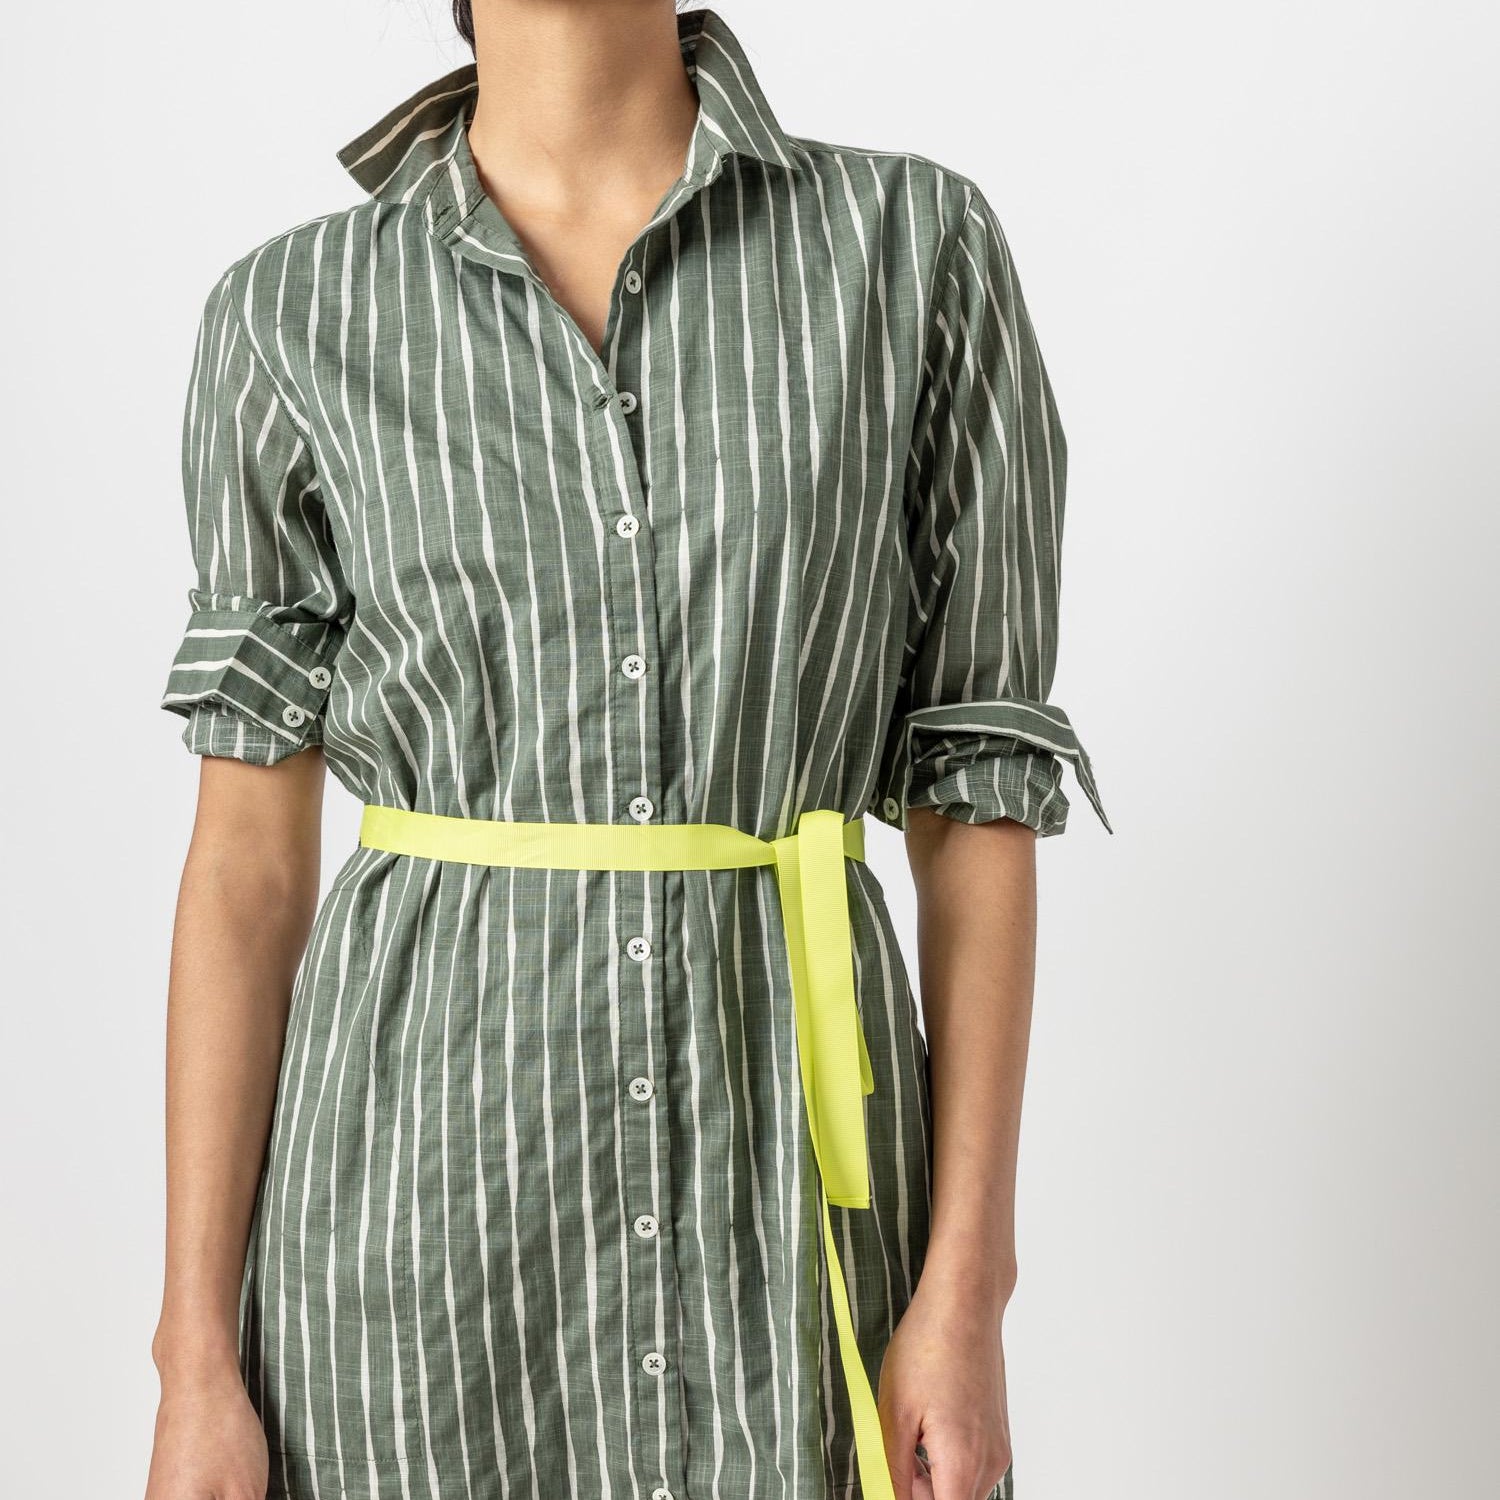 Stripped Button up Oxford Dress